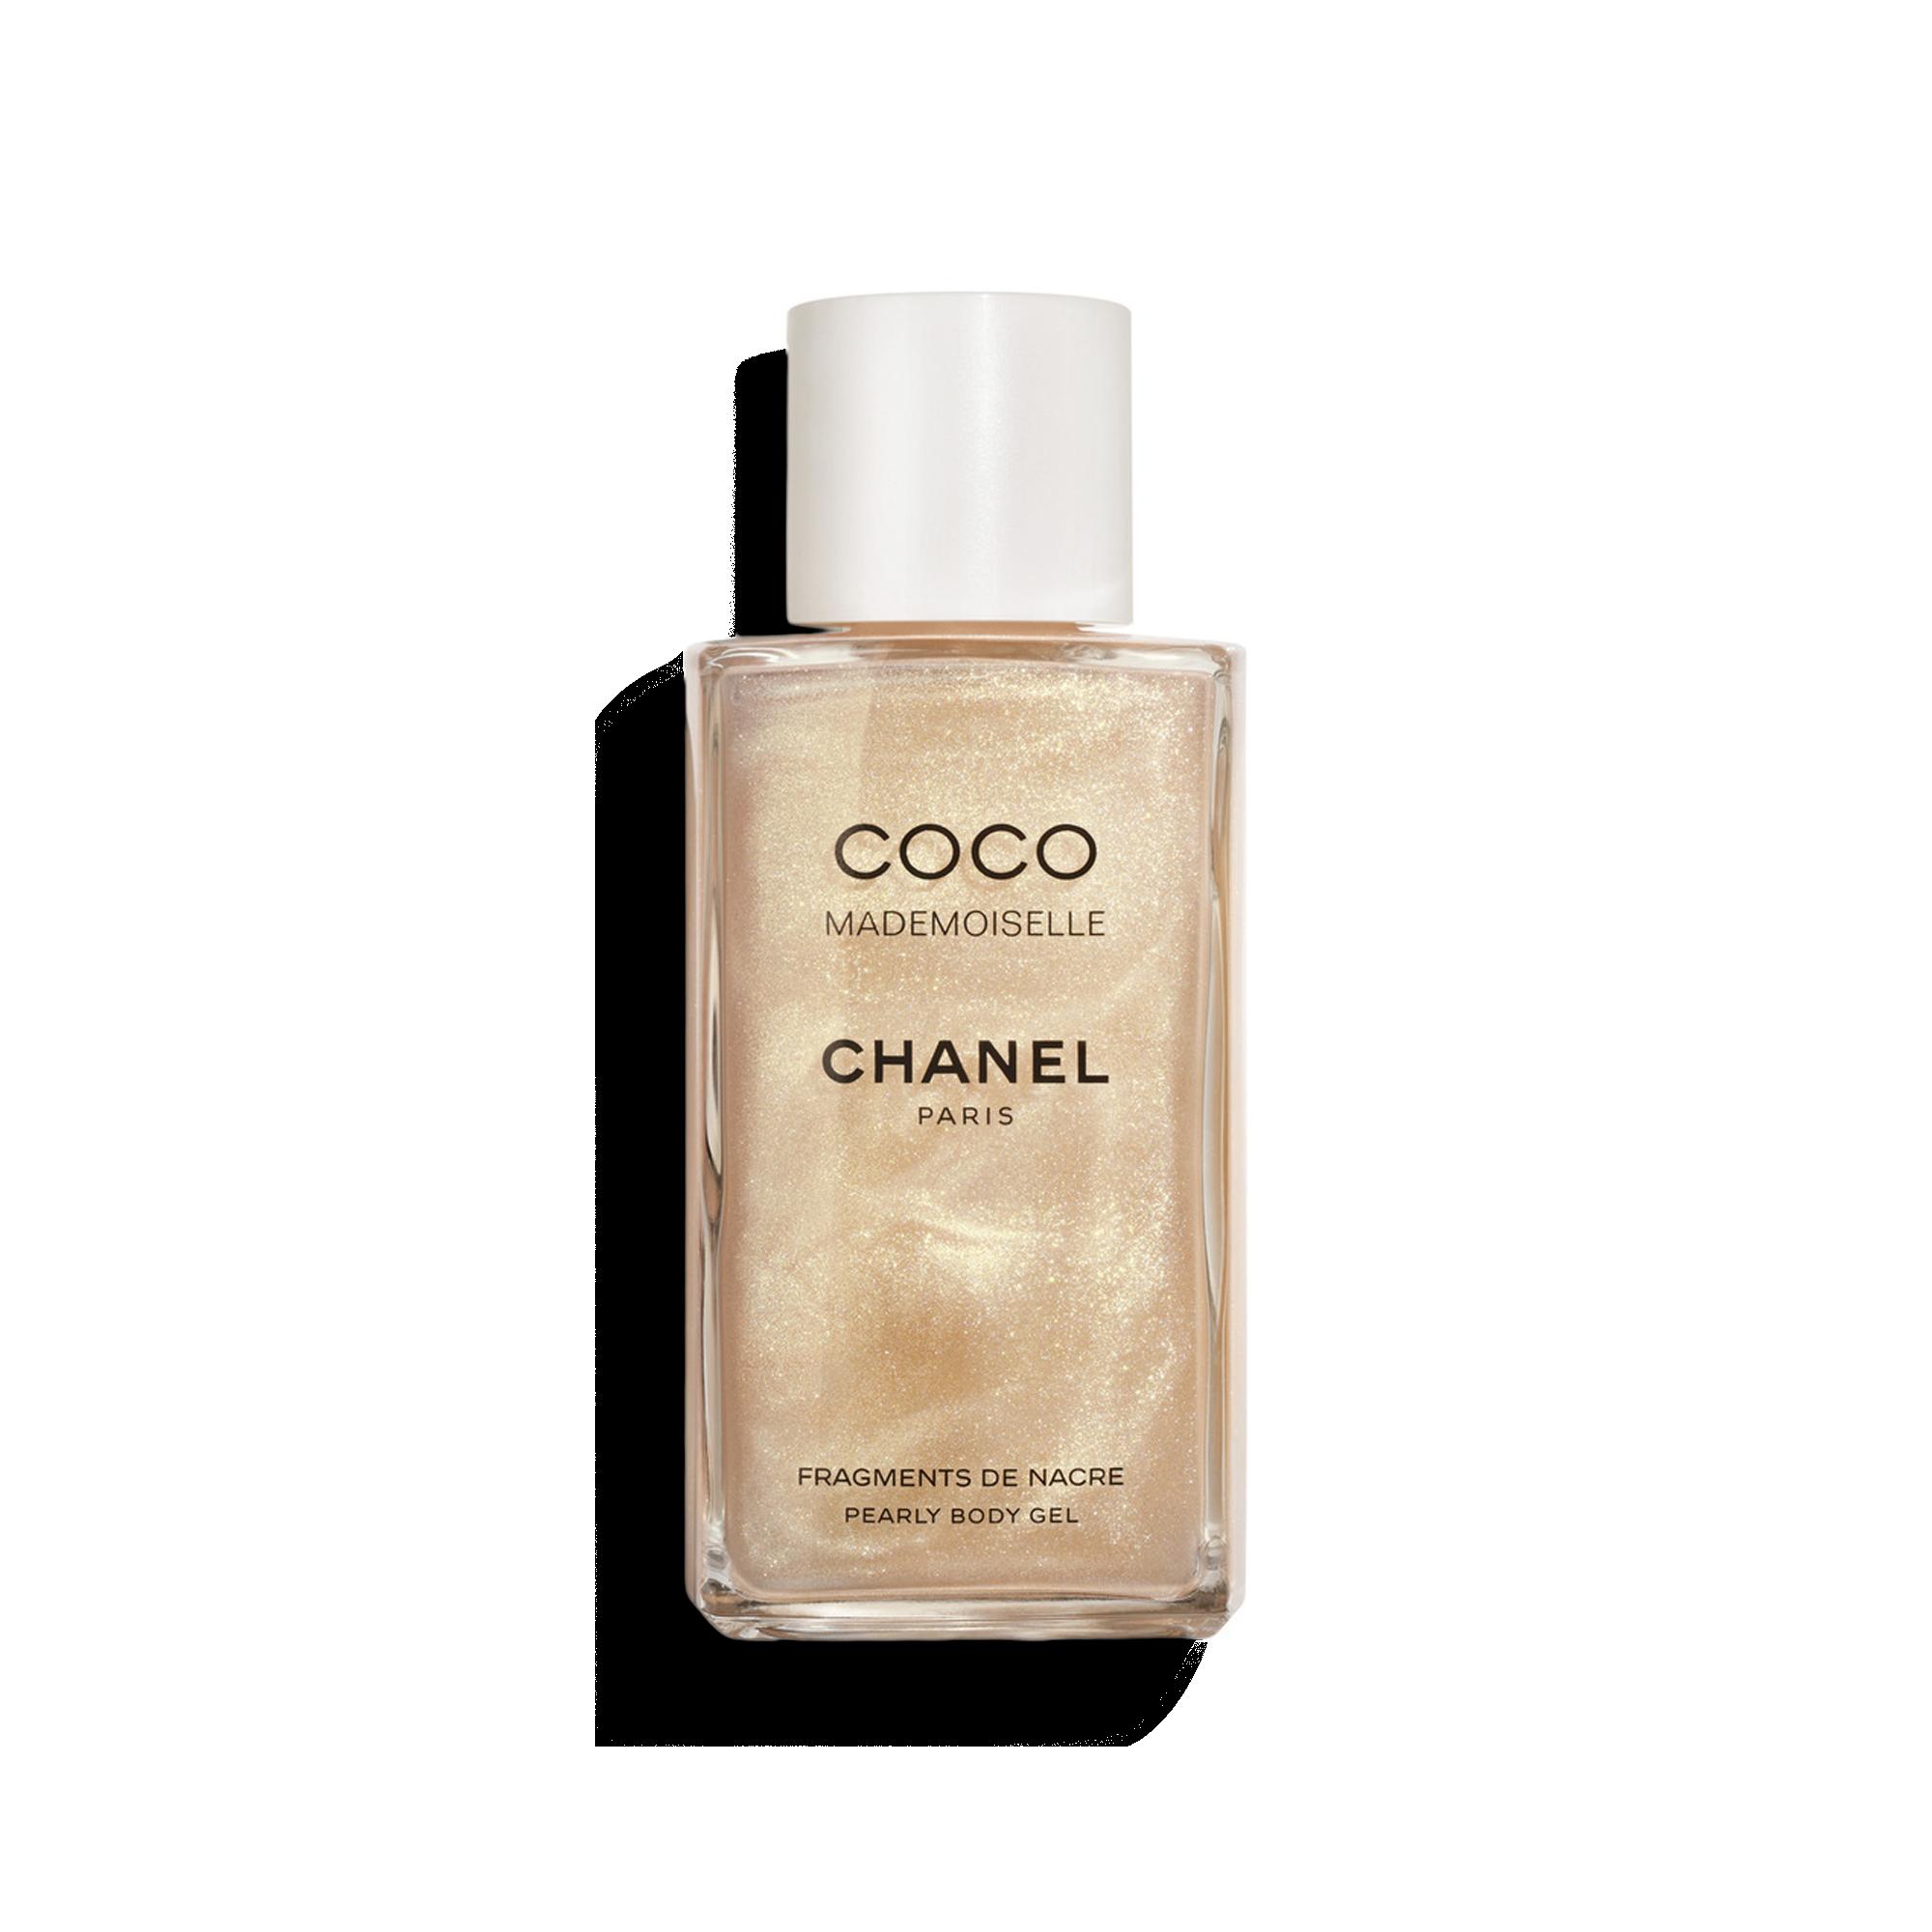 Chanel Coco Mademoiselle Pearly Body Gel 8.4 Fl Oz New in Sealed Box